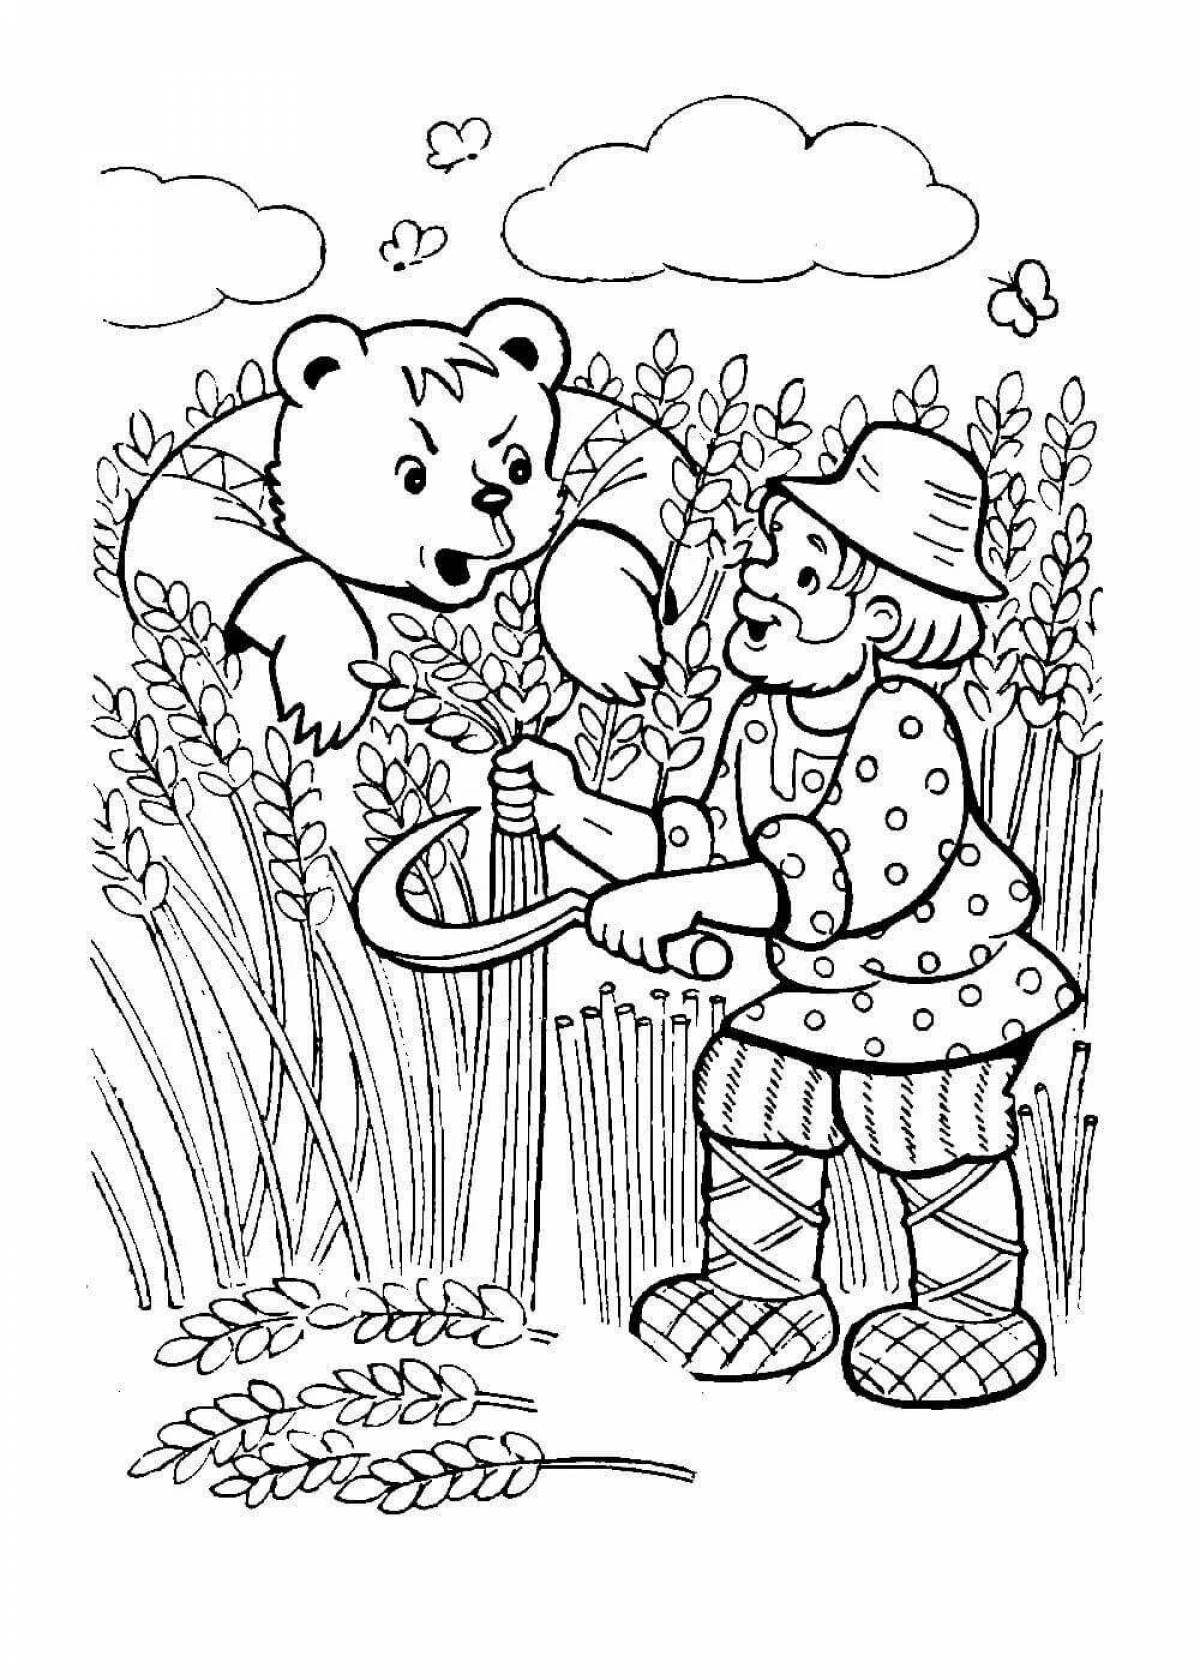 Dramatic story coloring page